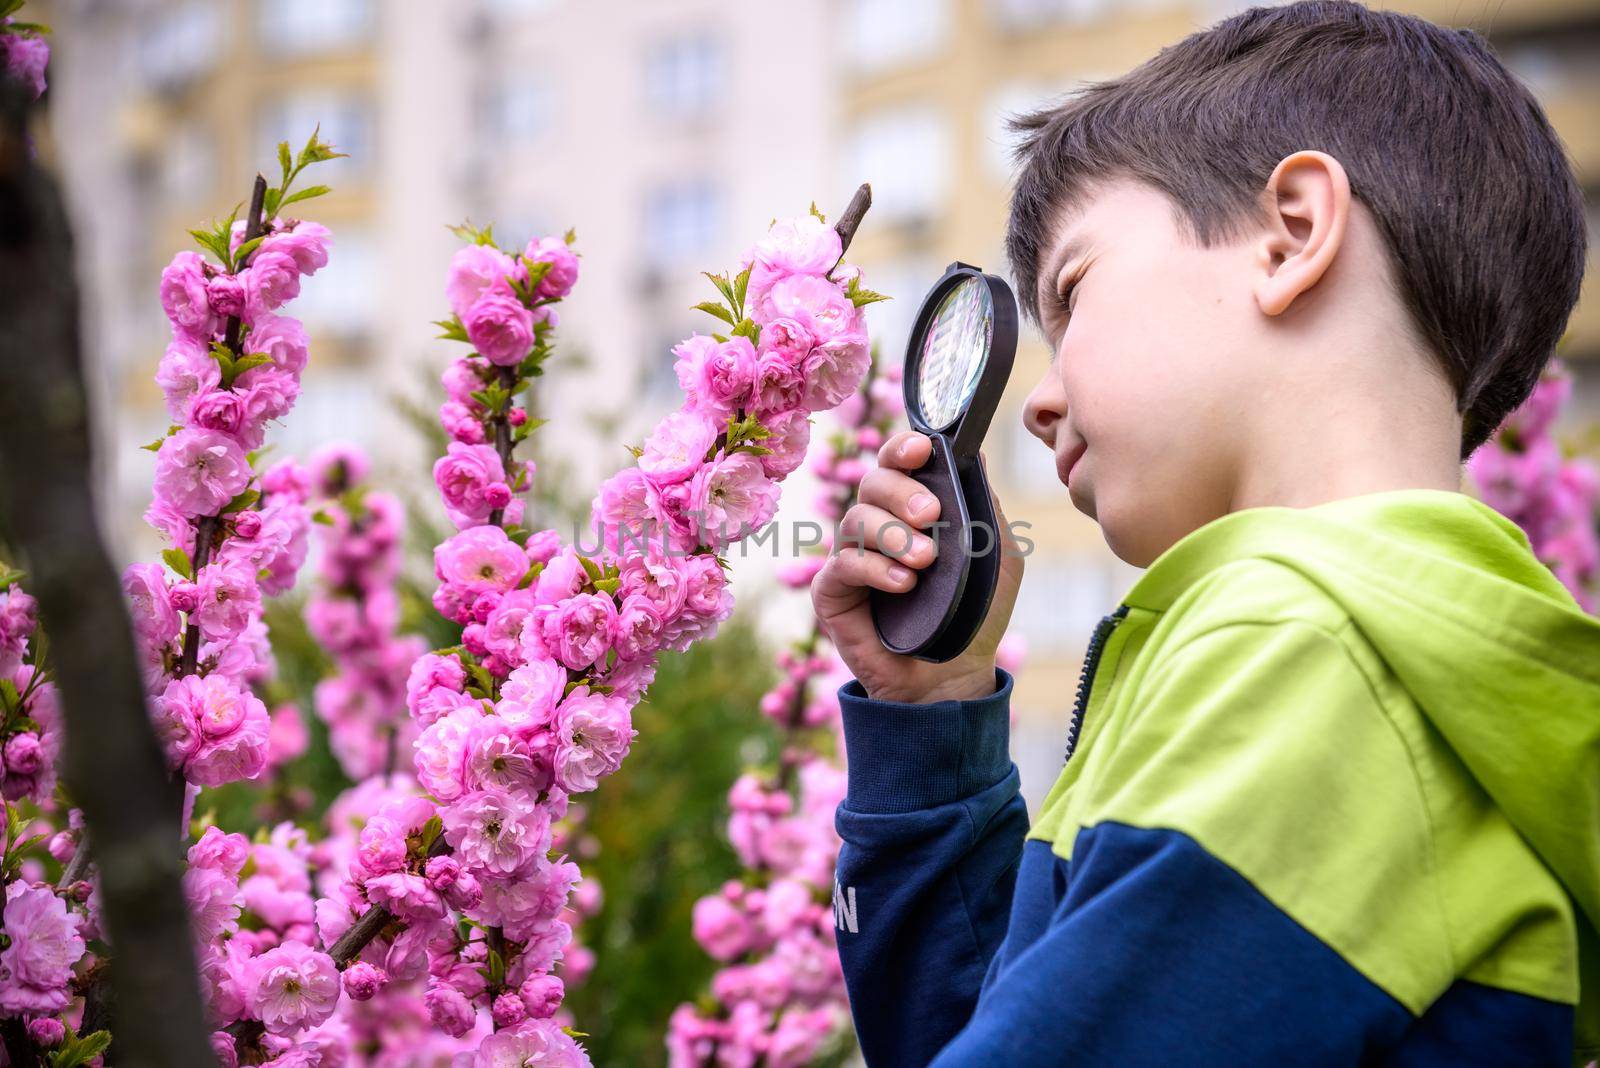 Little boy looking at flower through magnifier. Charming schoolboy exploring nature. Kid discovering spring cherry blossoms with magnifying glass. Young biologist, curious child outdoor activity by Kobysh